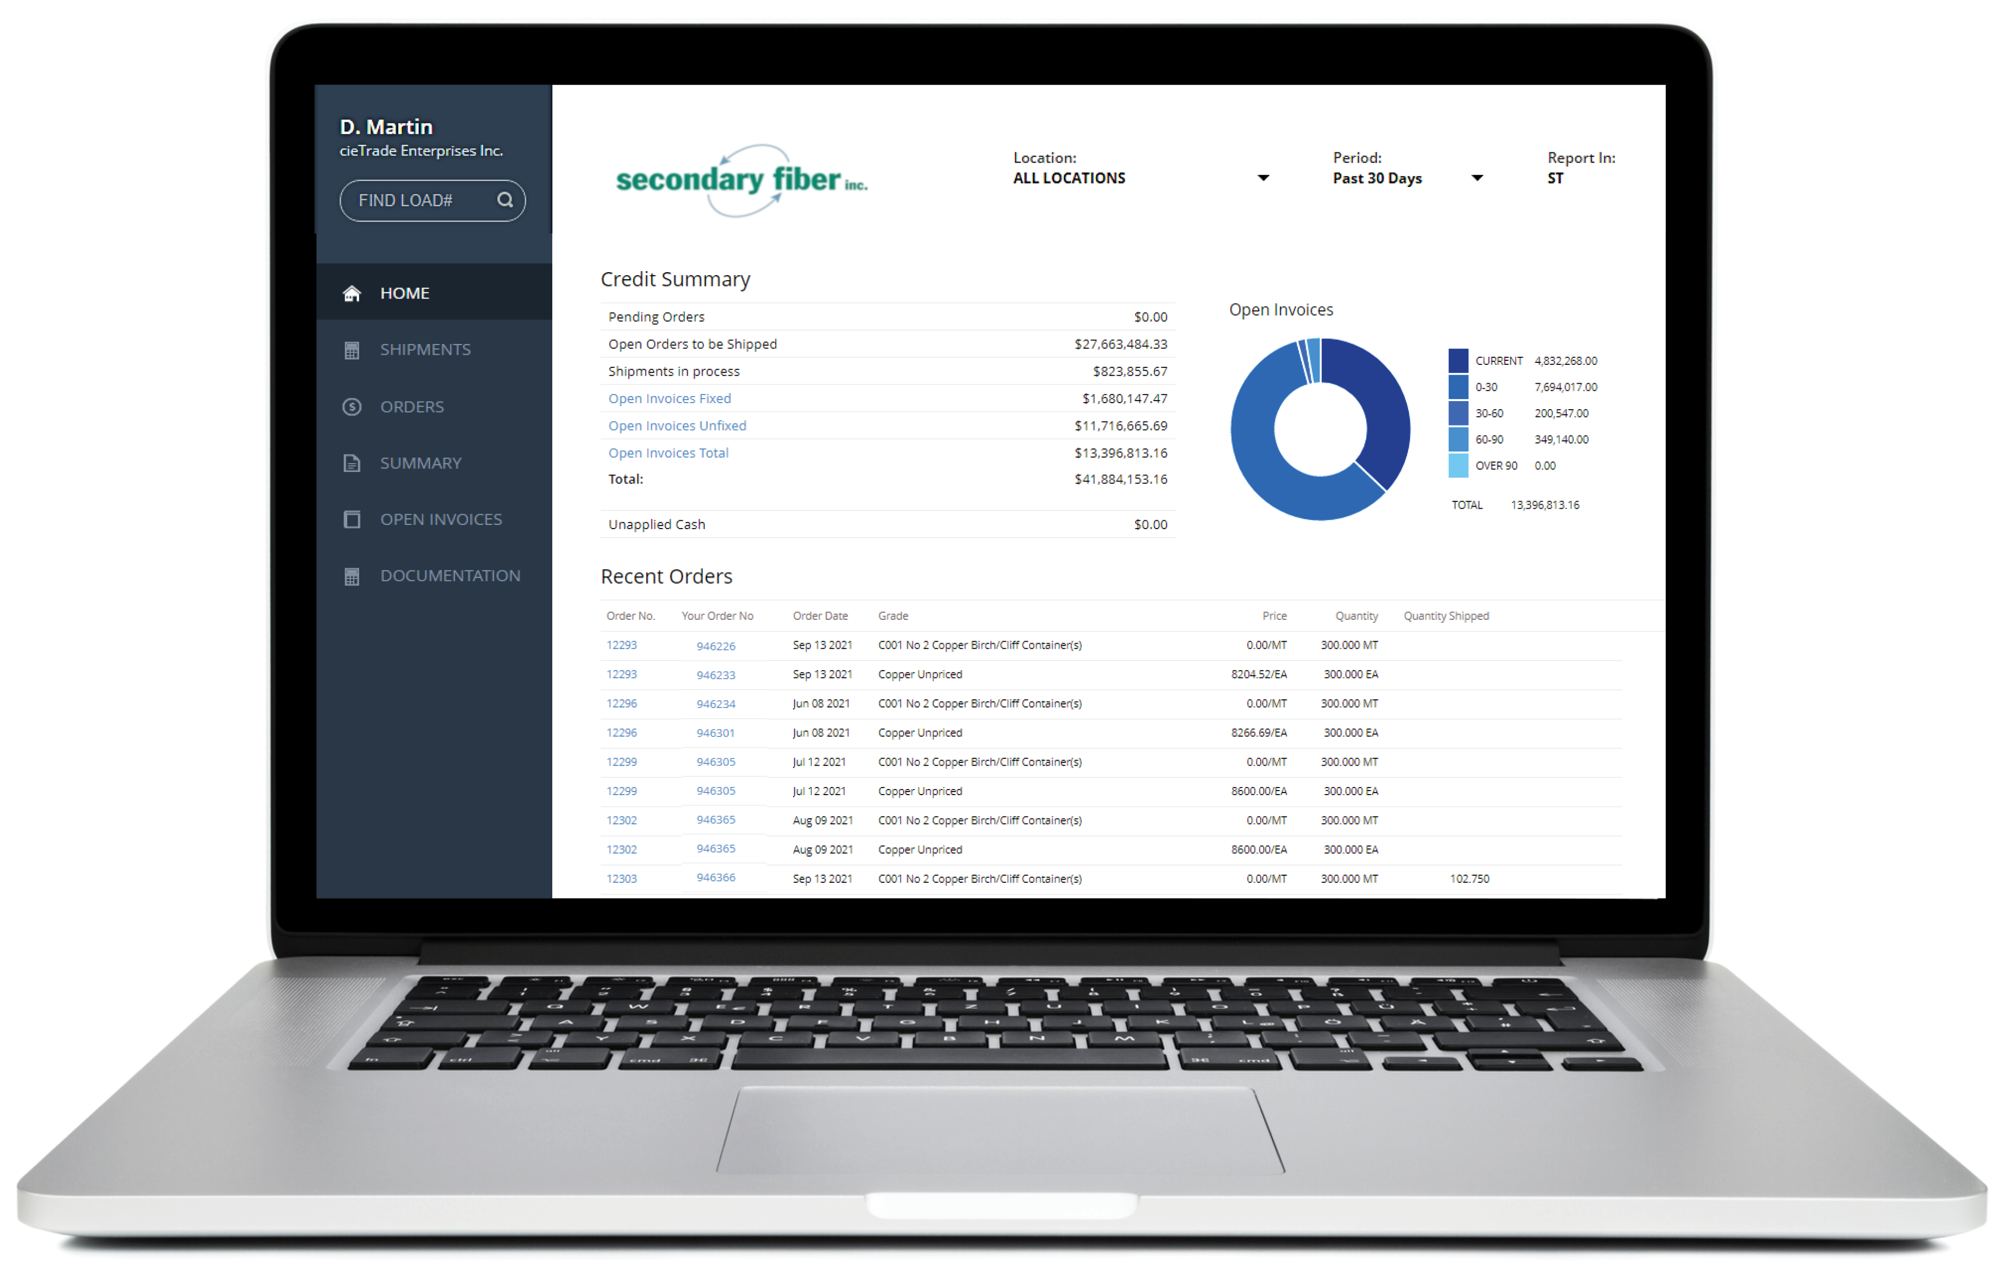 cieTrade's Customer Self-Service Portal provides your customers with 24/7 on-demand access and visibility into pricing, shipments, payments, recycling program performance and much more.